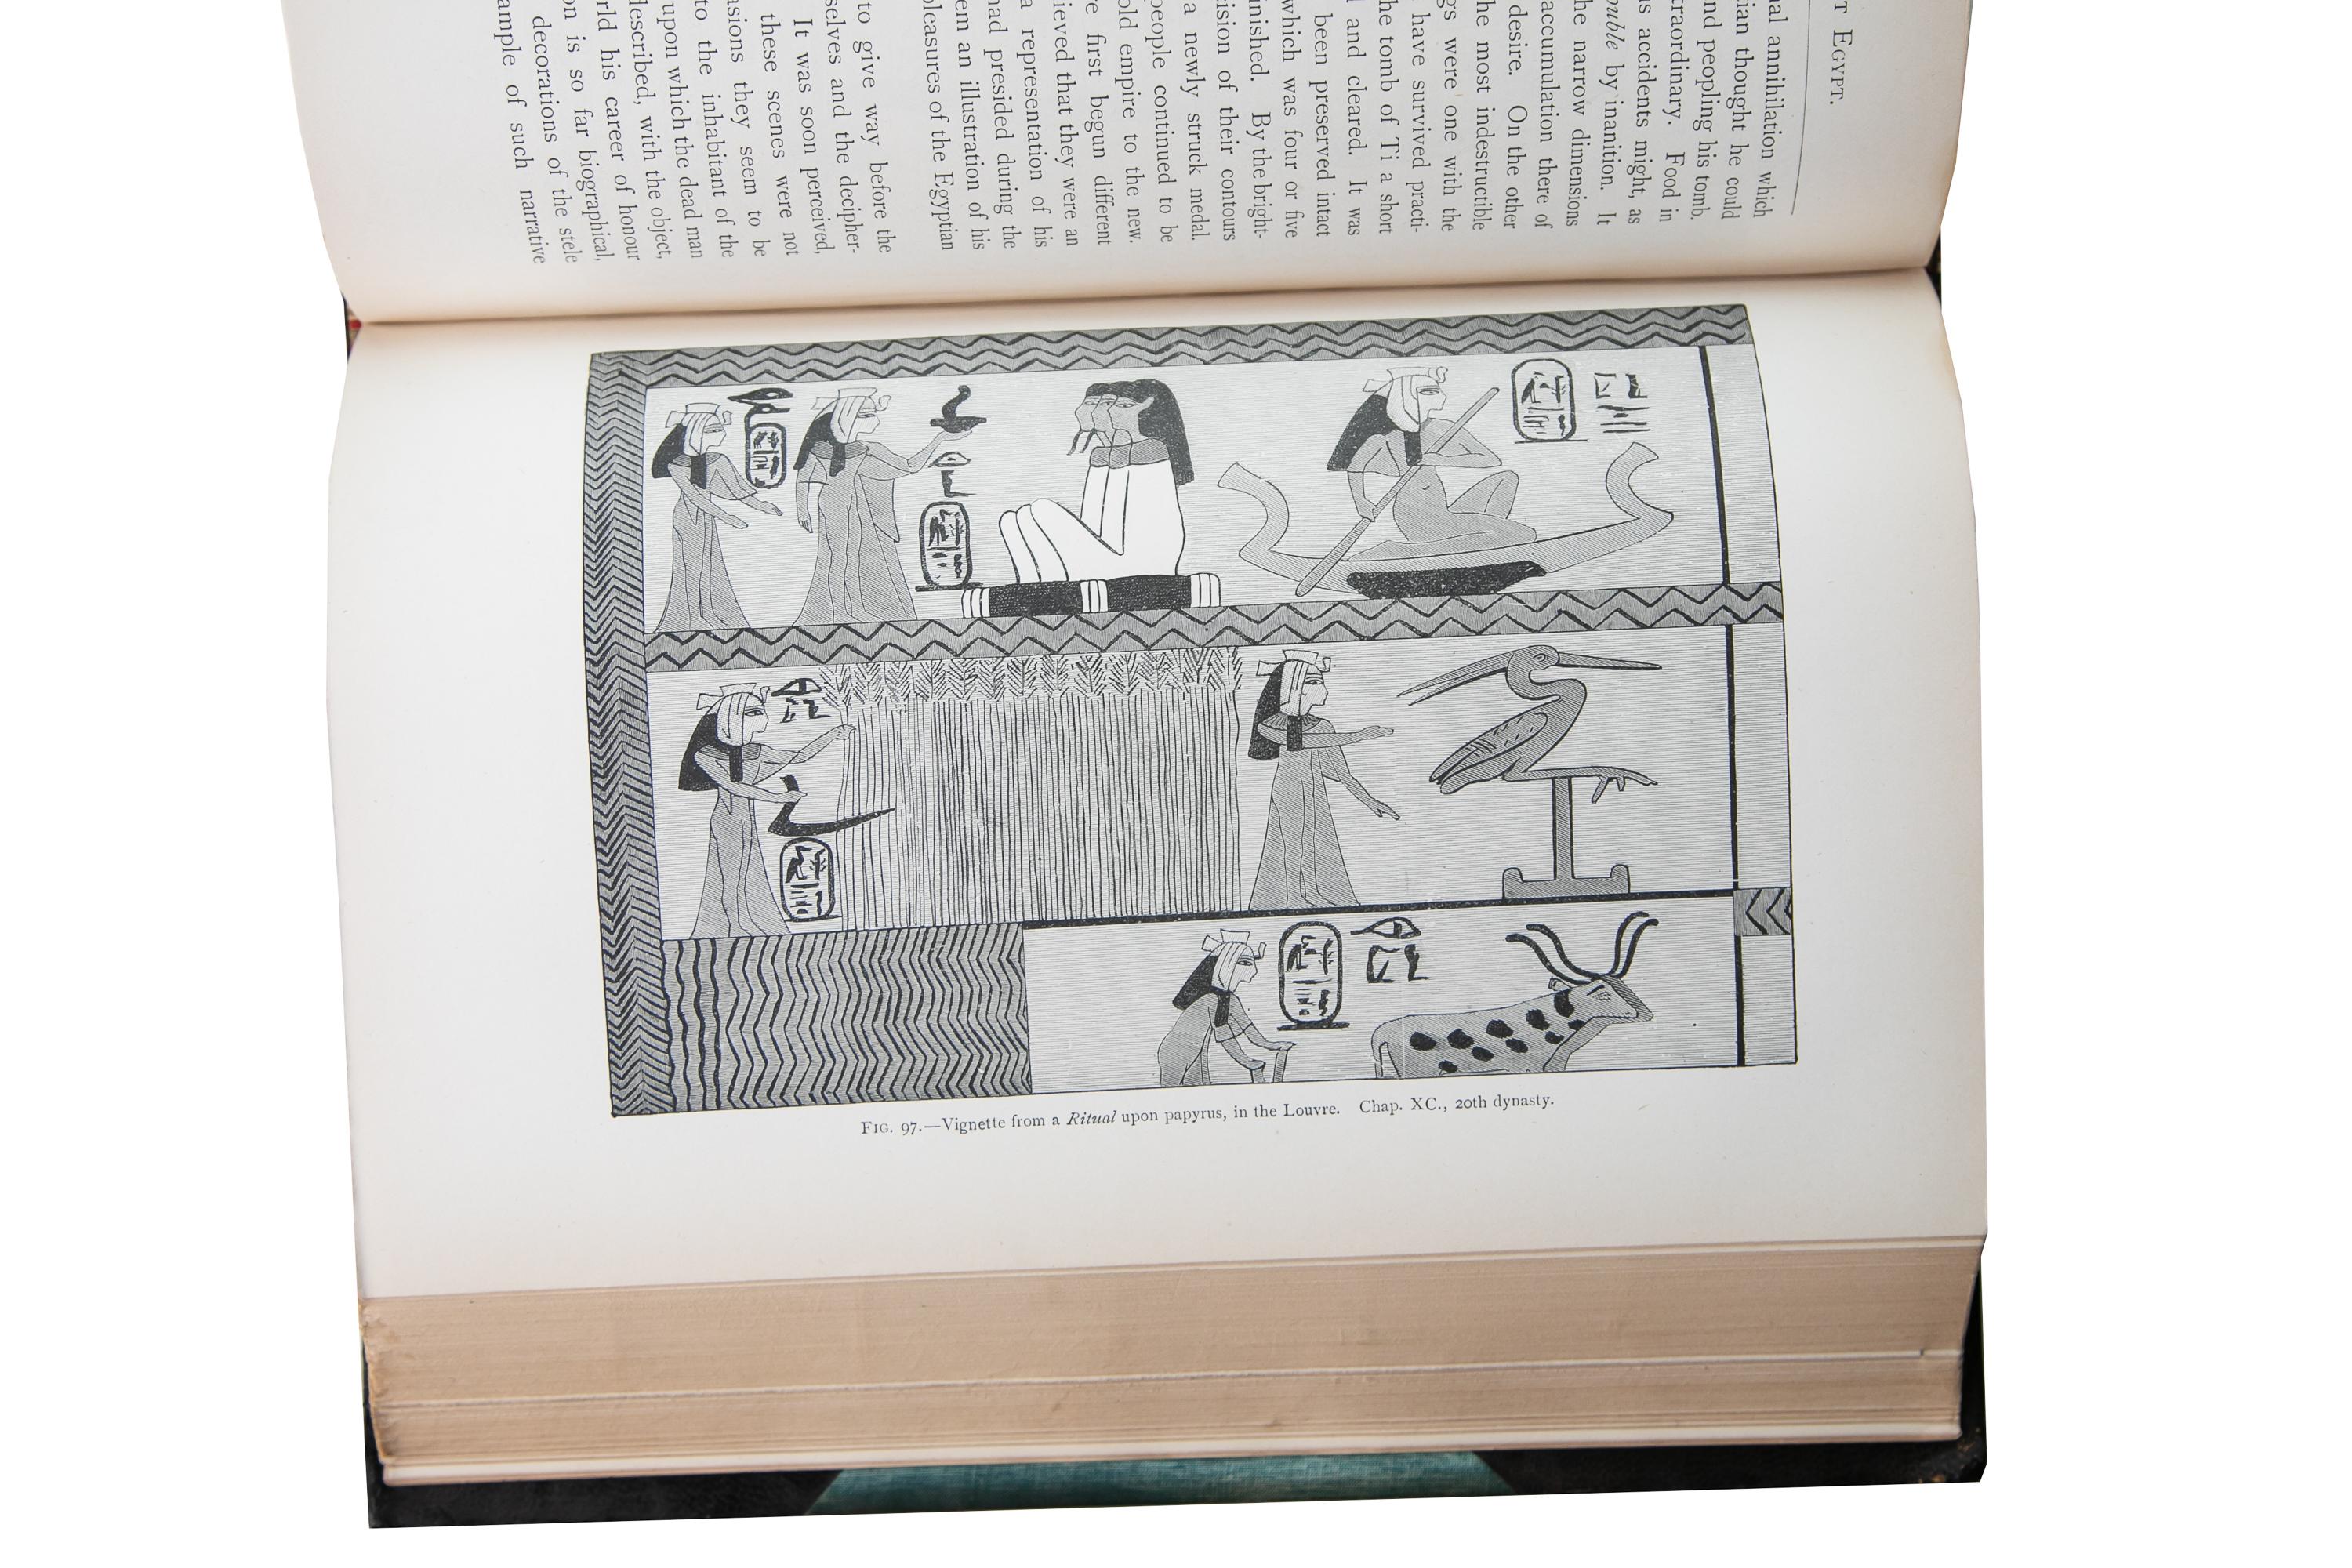 19th Century 2 Volumes. Georges Perrot & Charles Chipiez, A History of Art in Ancient Egypt.